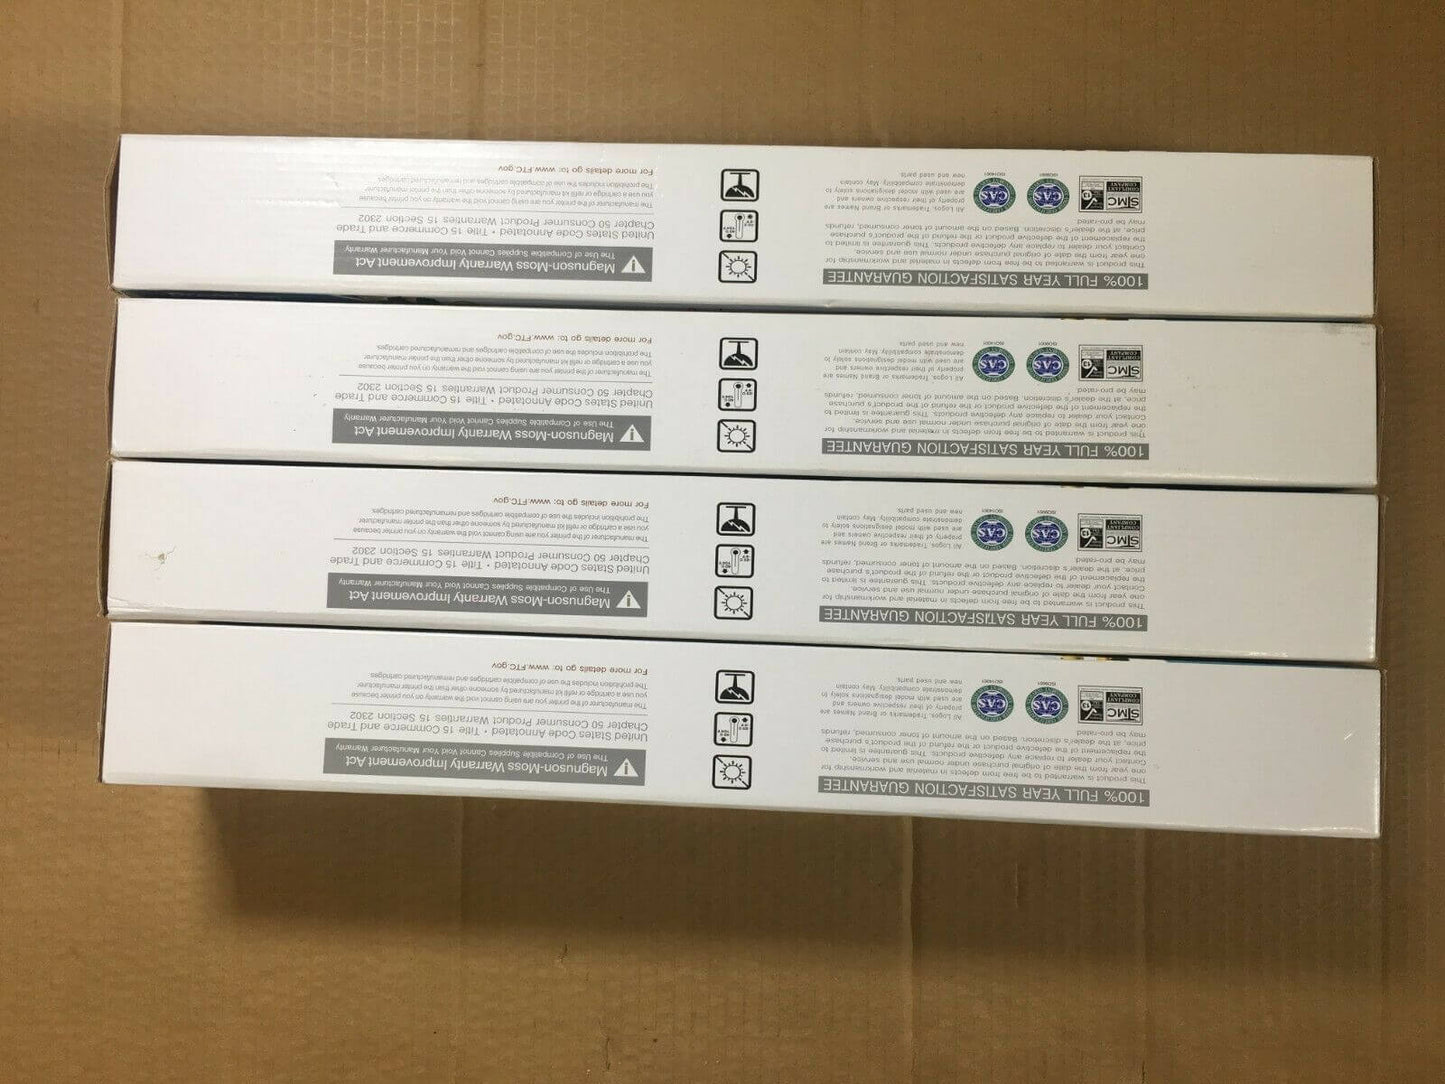 4 Compatible With Sharp MX-31NT CMK Toner For MX2600N 3100N FedEx 2Day Air!! - copier-clearance-center